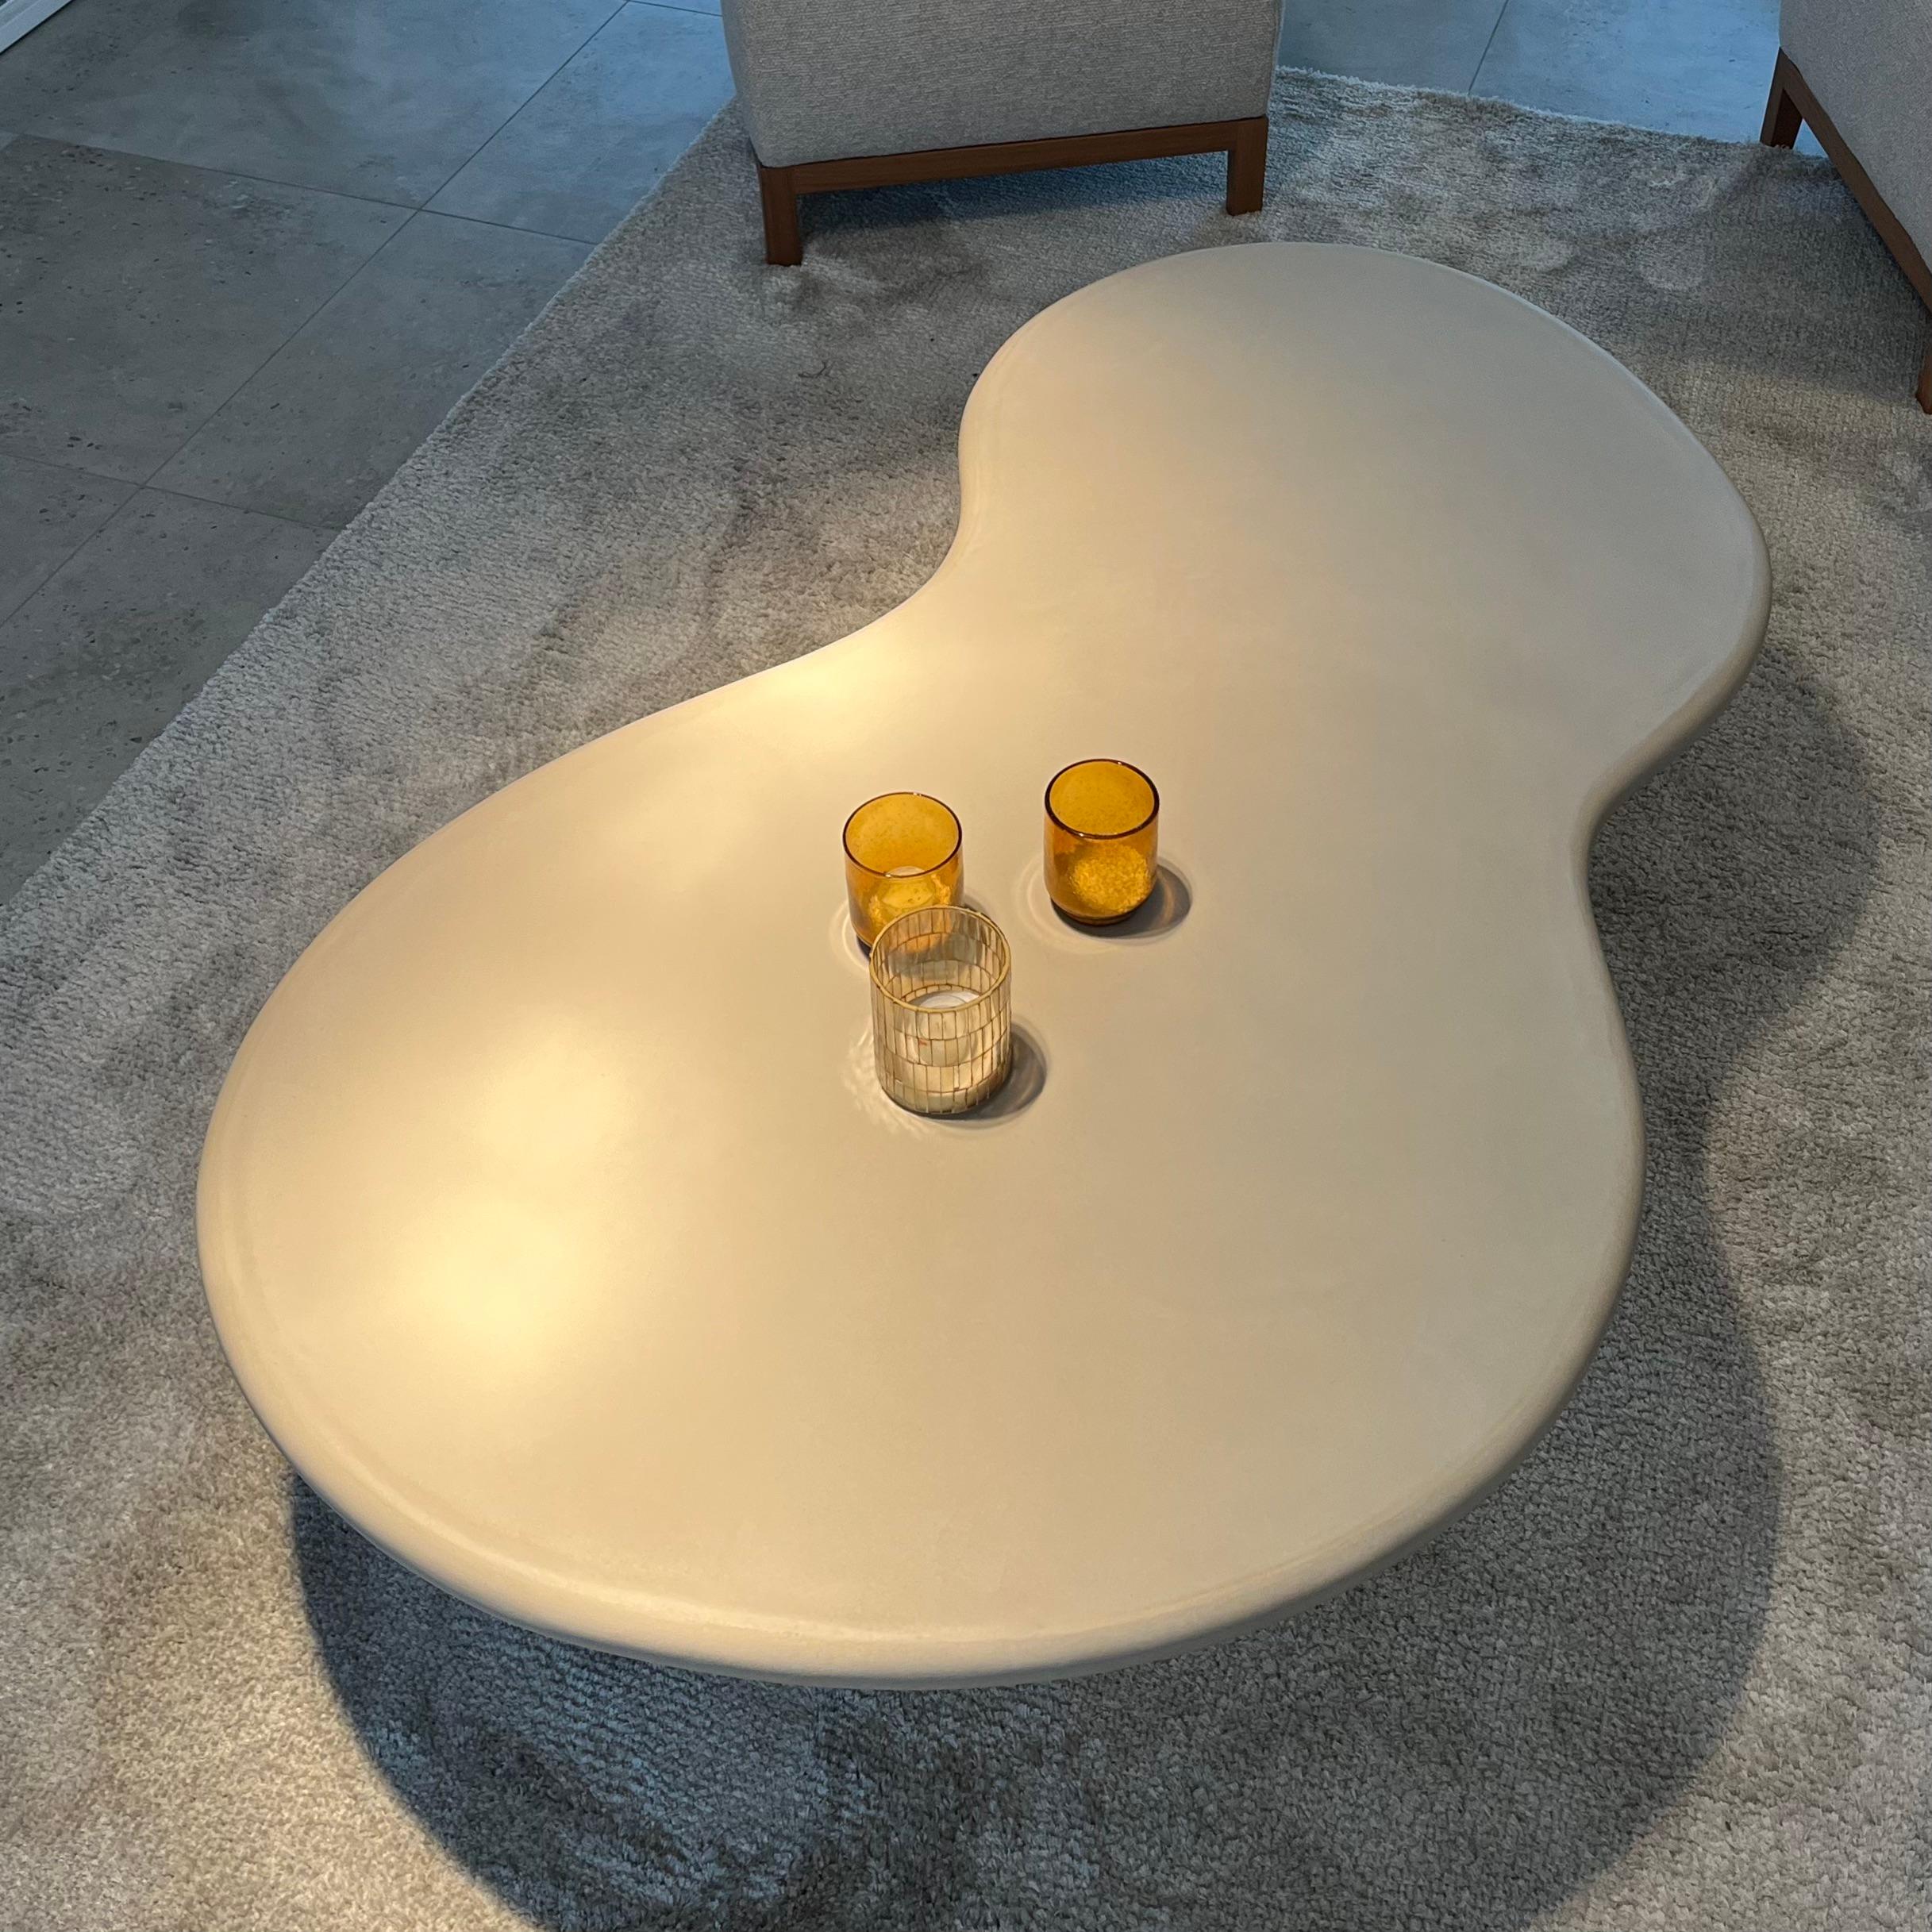 Organic Shaped Natural Plaster Coffee Table 